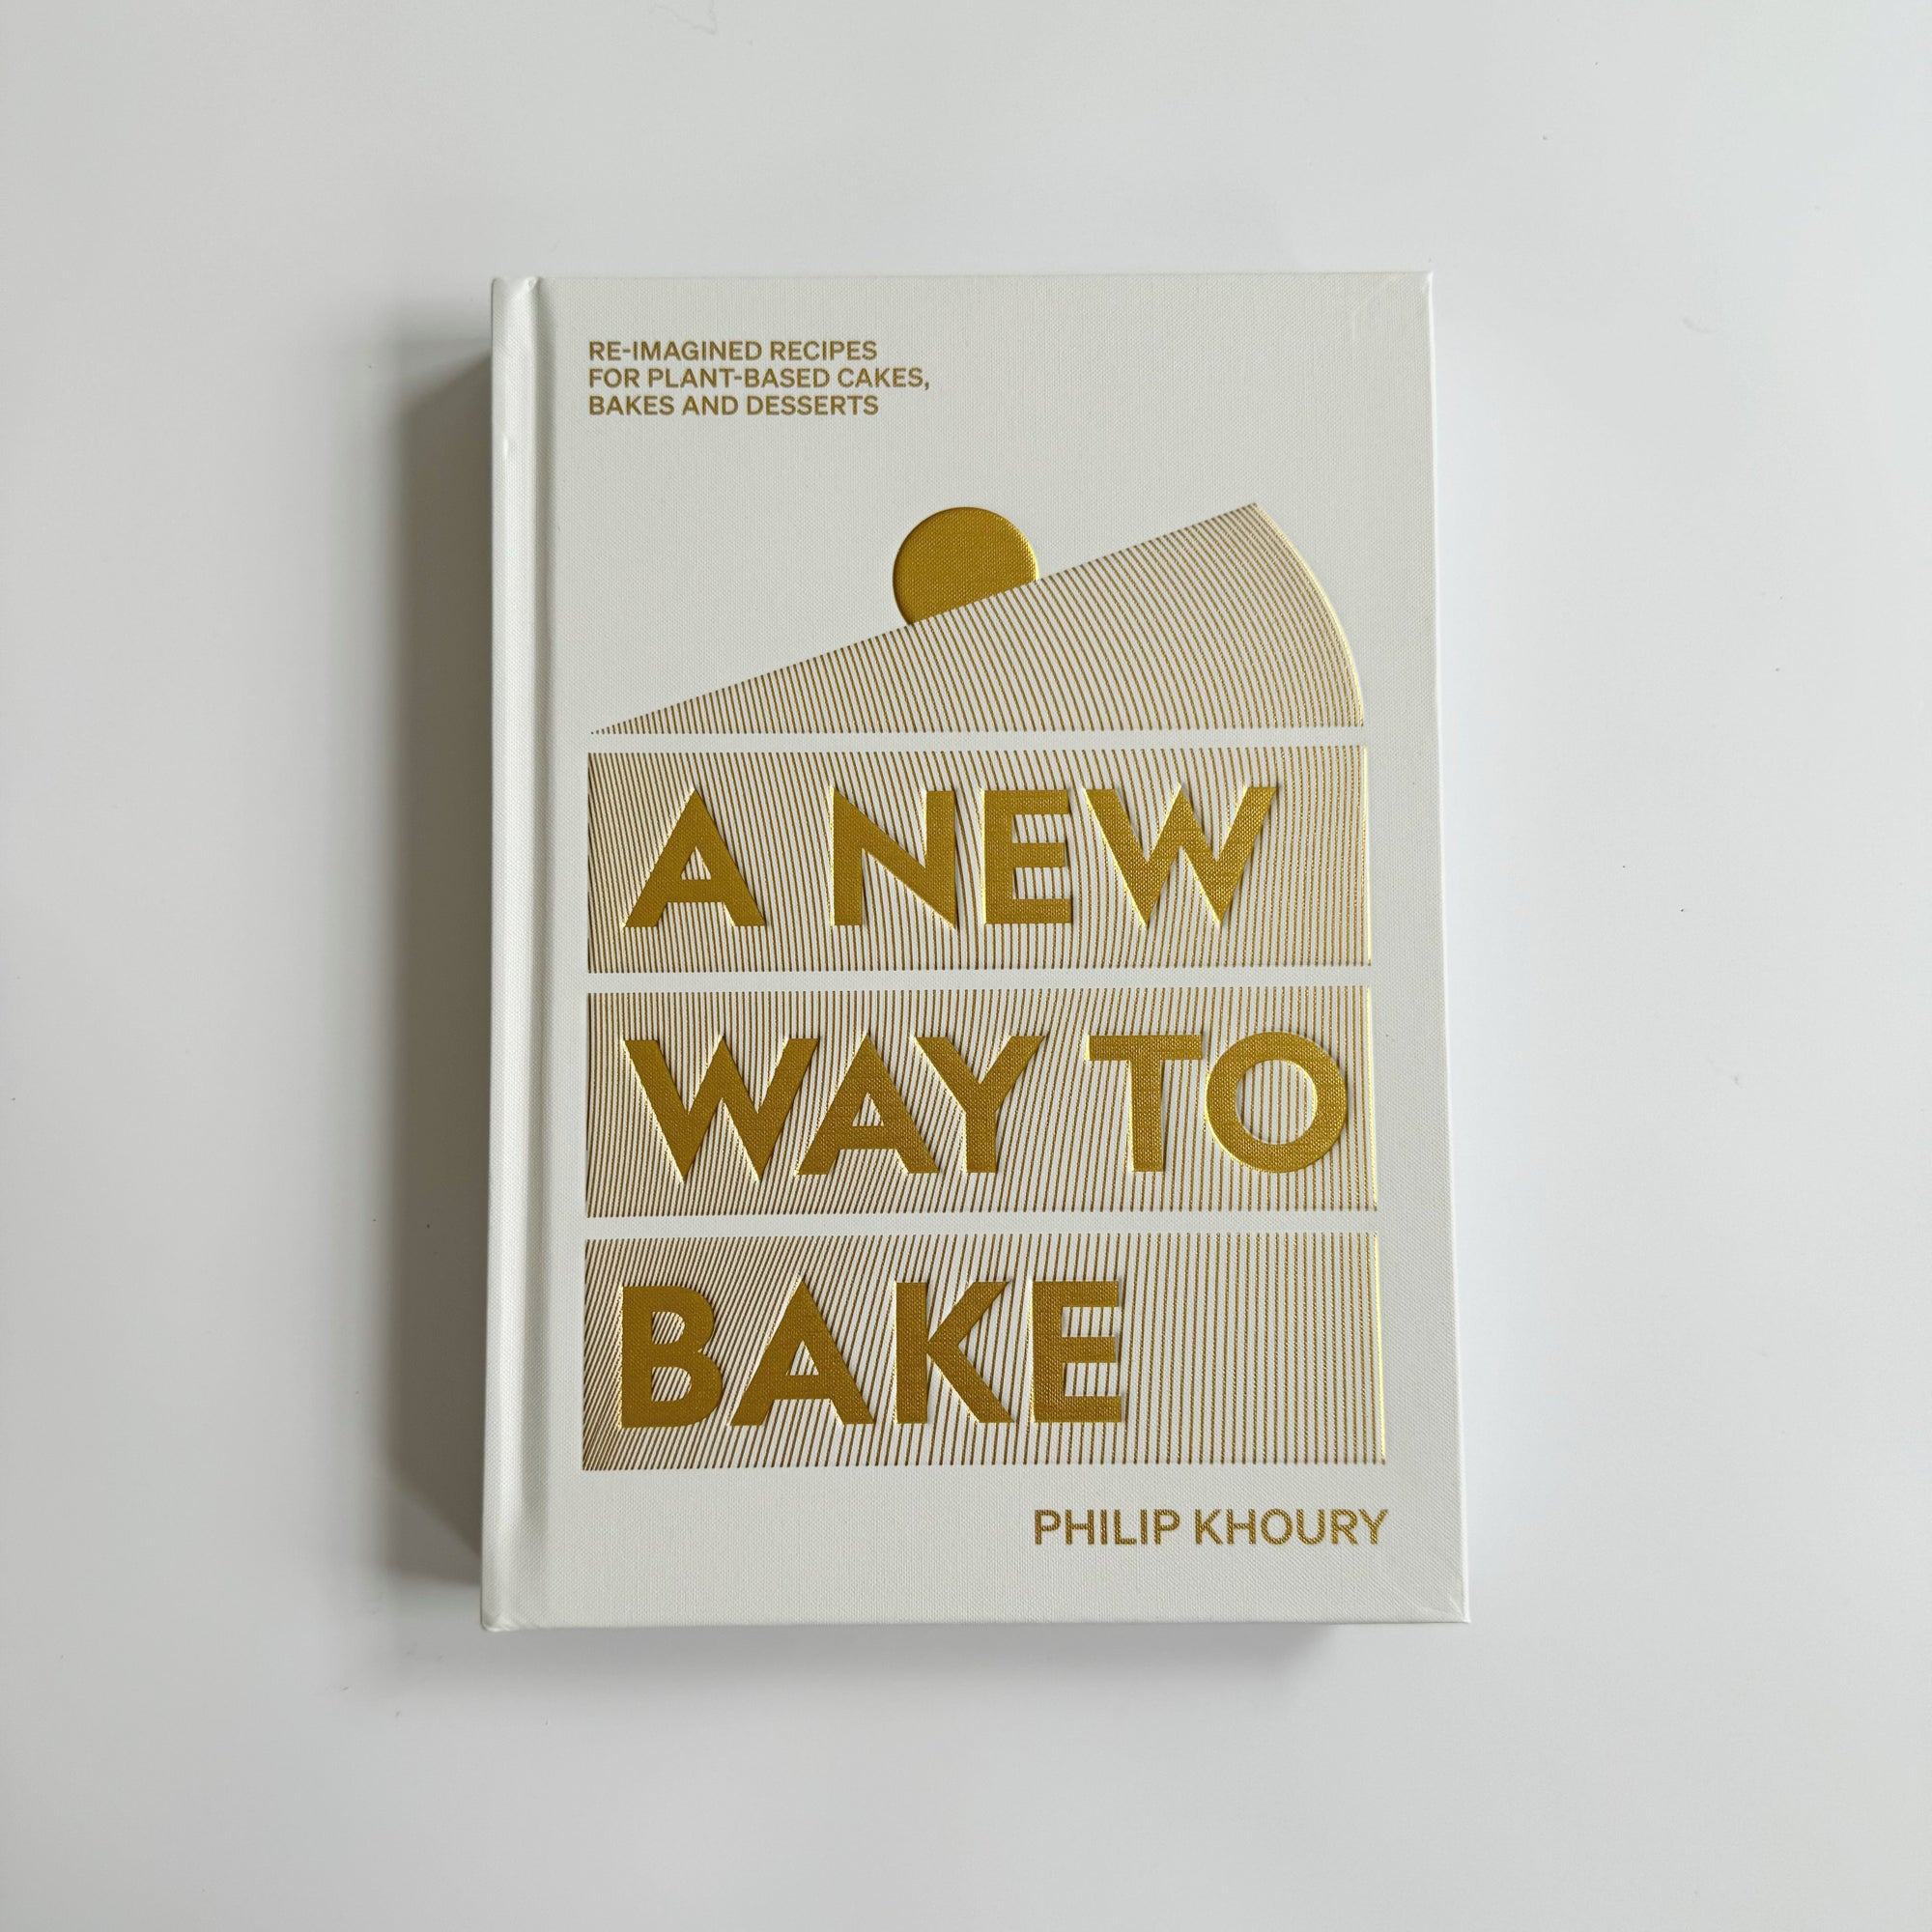 A NEW WAY TO BAKE